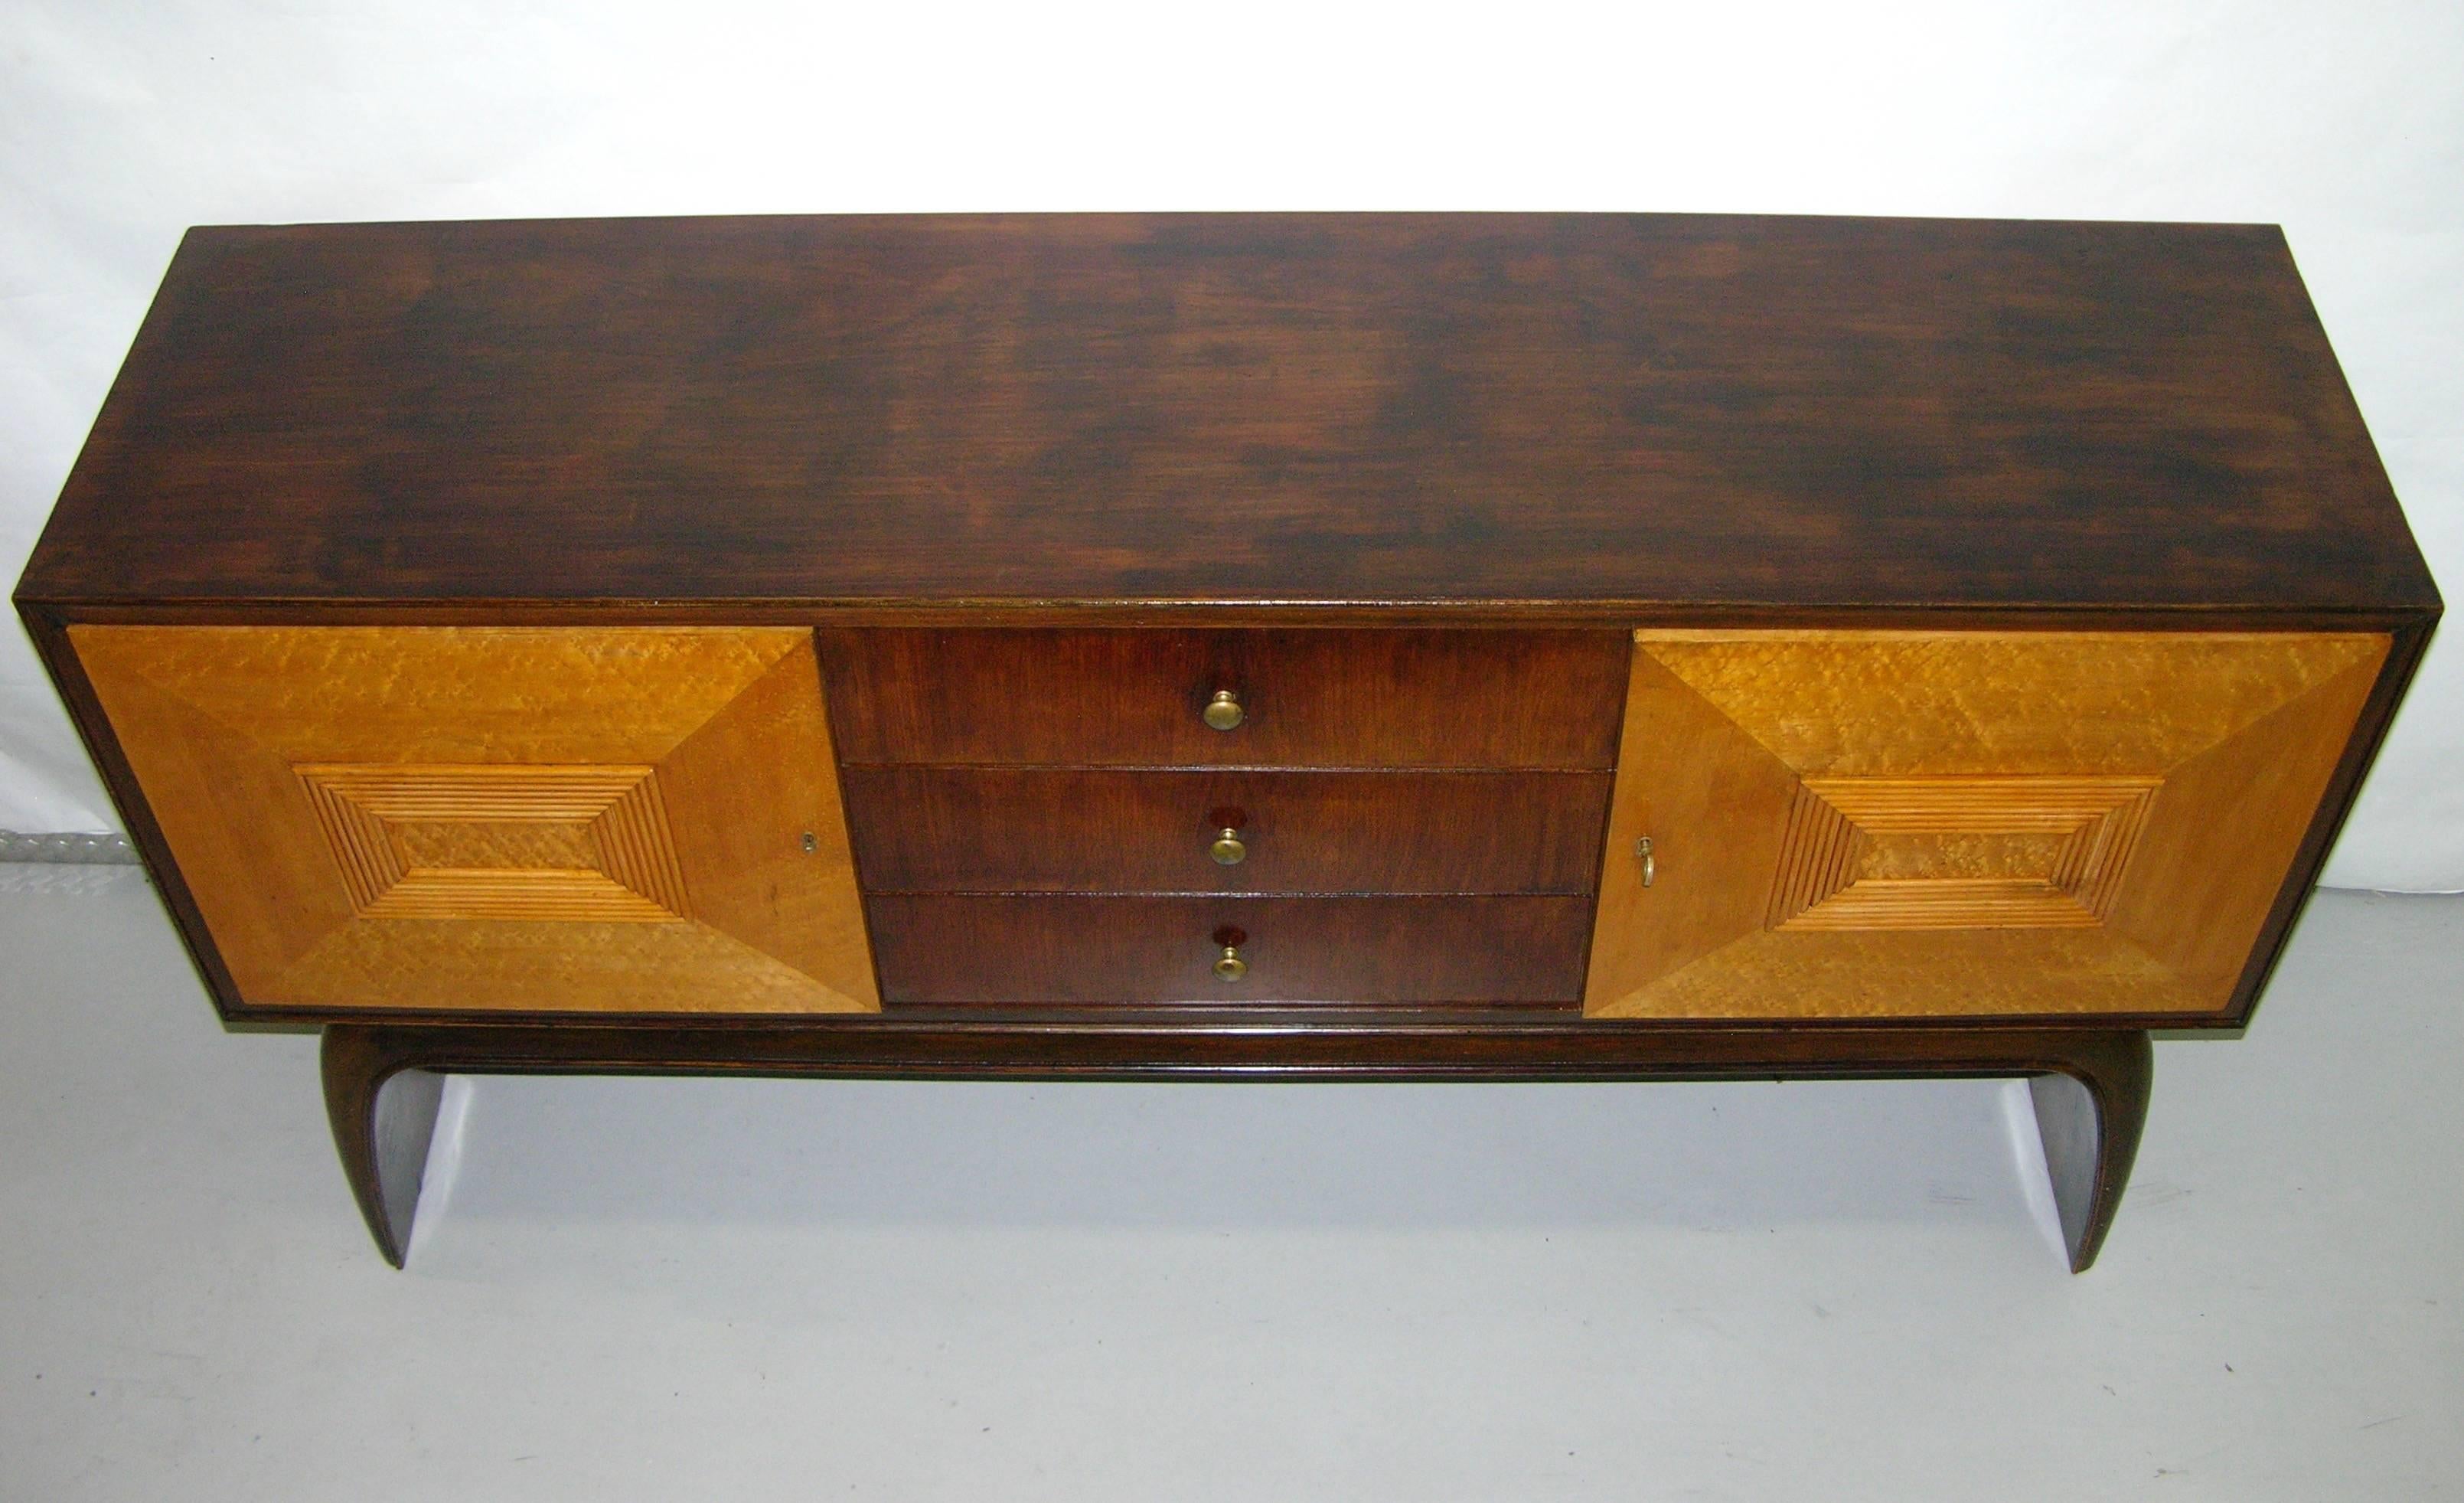 1930 Italian Antique Art Deco Two-Tone Rosewood and Burl Maple Sideboard/Console 4